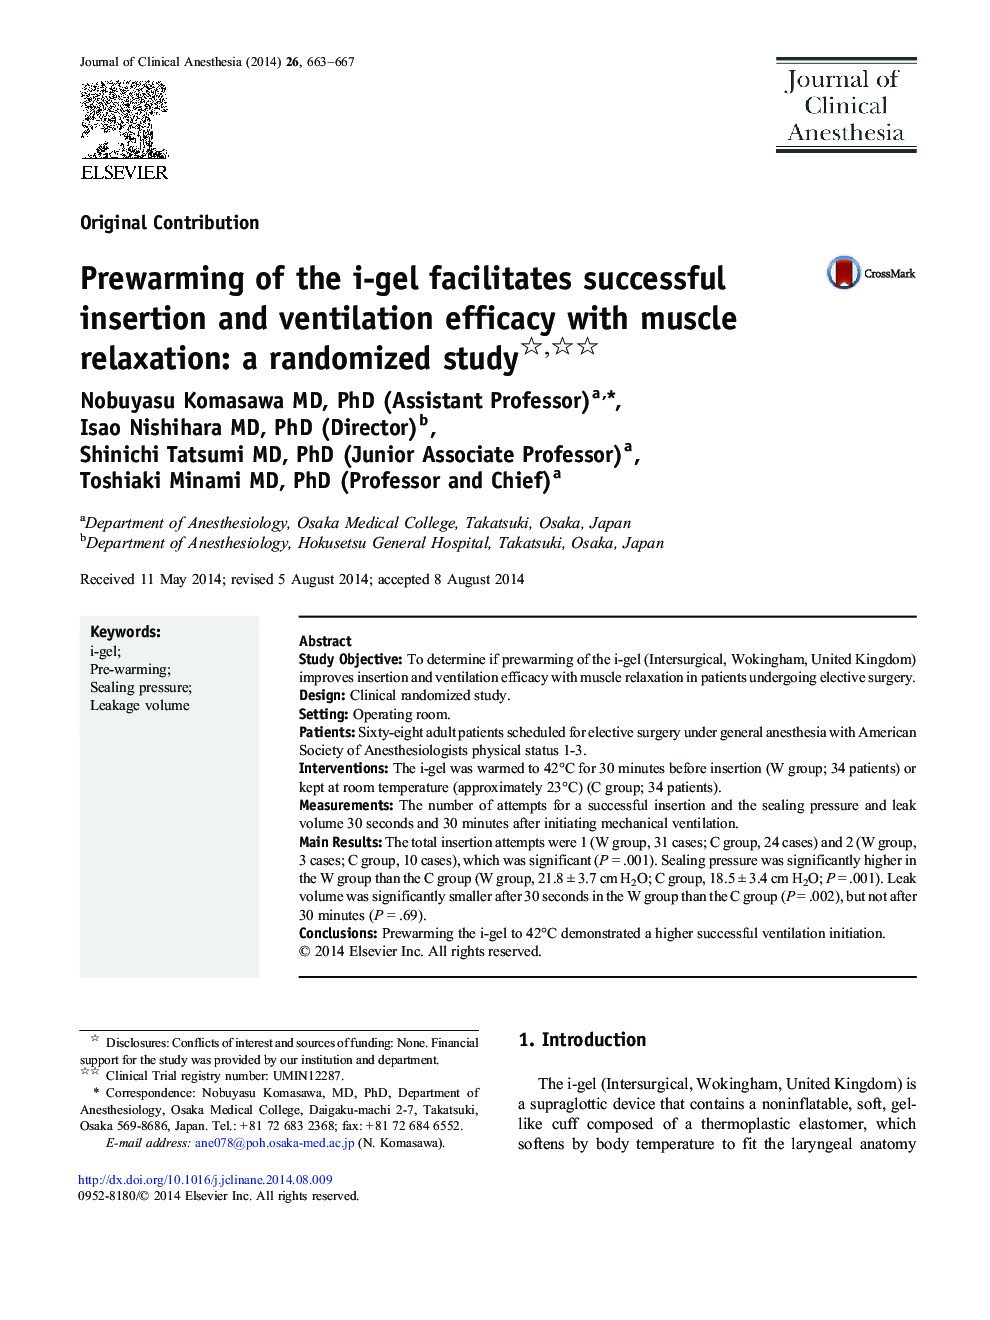 Prewarming of the i-gel facilitates successful insertion and ventilation efficacy with muscle relaxation: a randomized study 